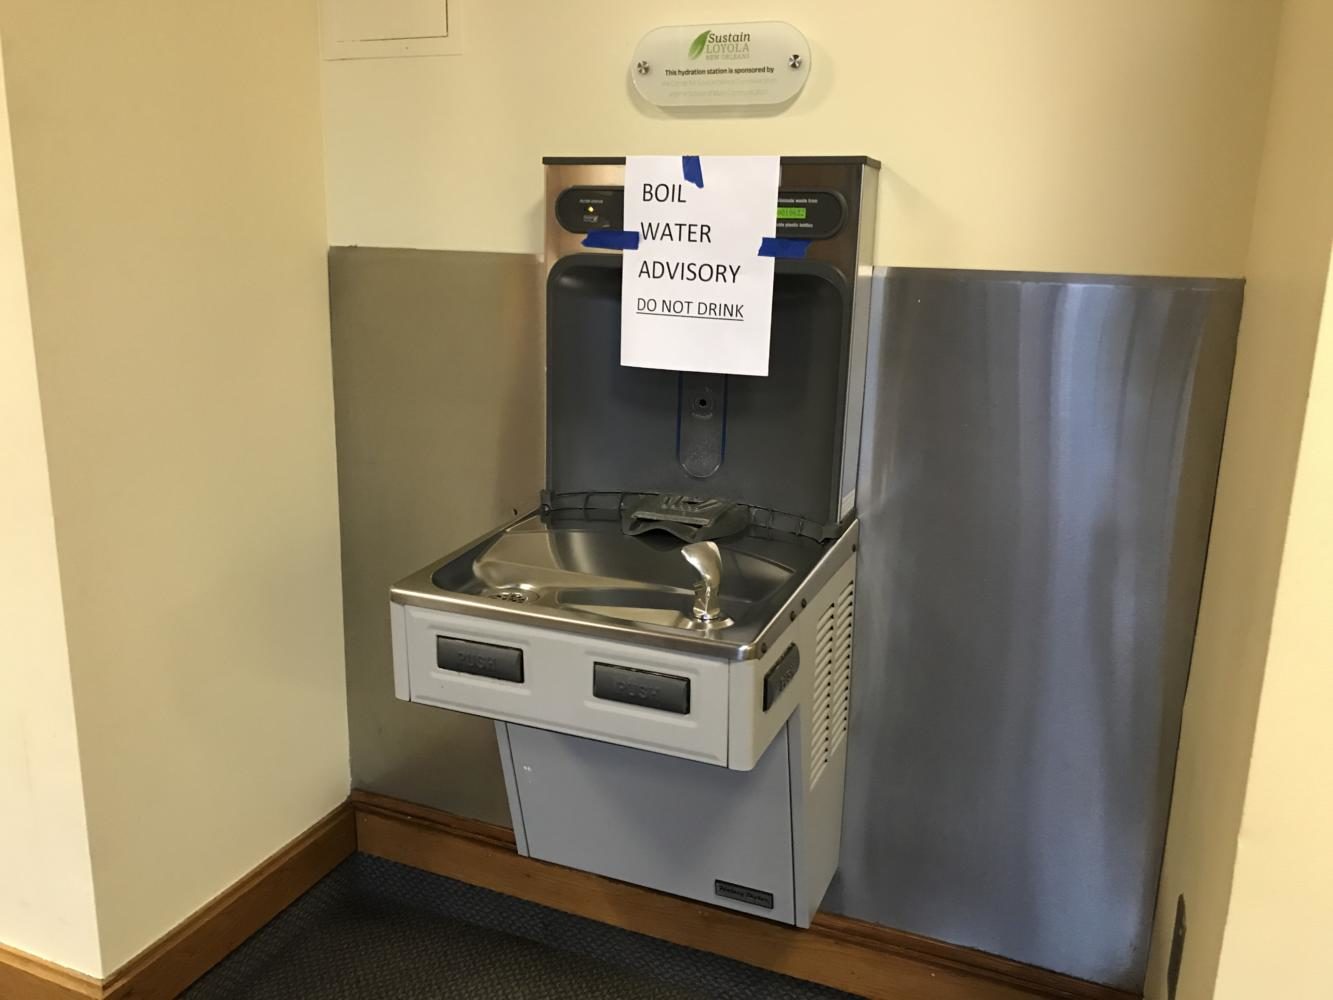 A sign warns not to drink from the water fountains in the Communications and Music Complex on Sept. 20, 2017. Photo credit: Nick Reimann